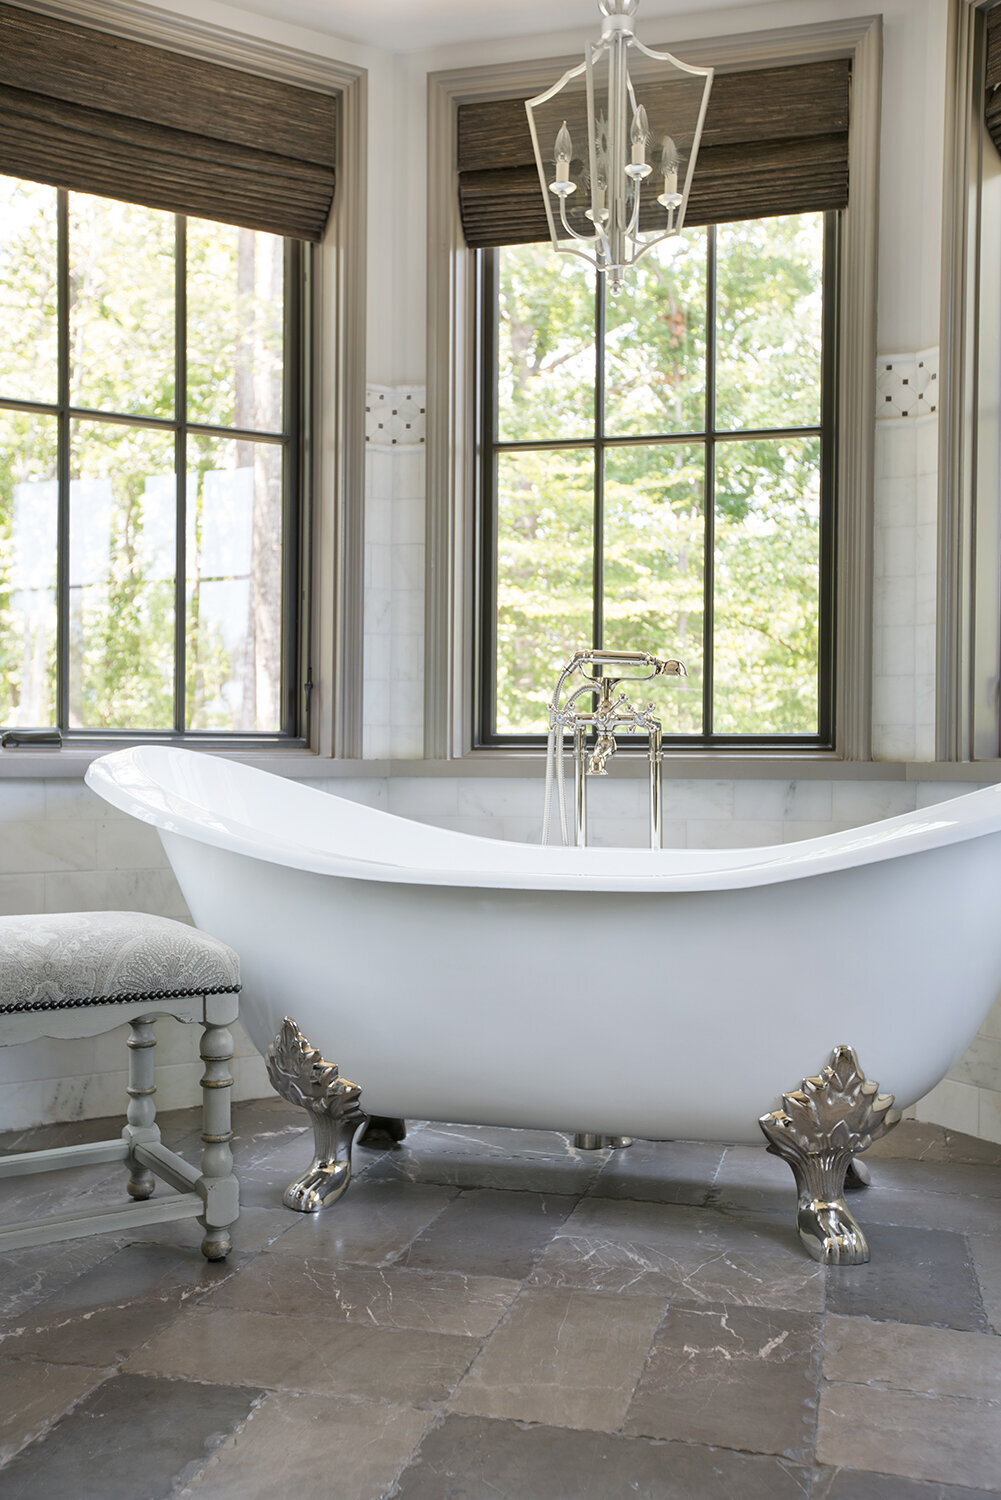 Panageries Residential Interior Design | Traditional Mountain Roost Master Bathtub with Feet, Bench, and Chandelier